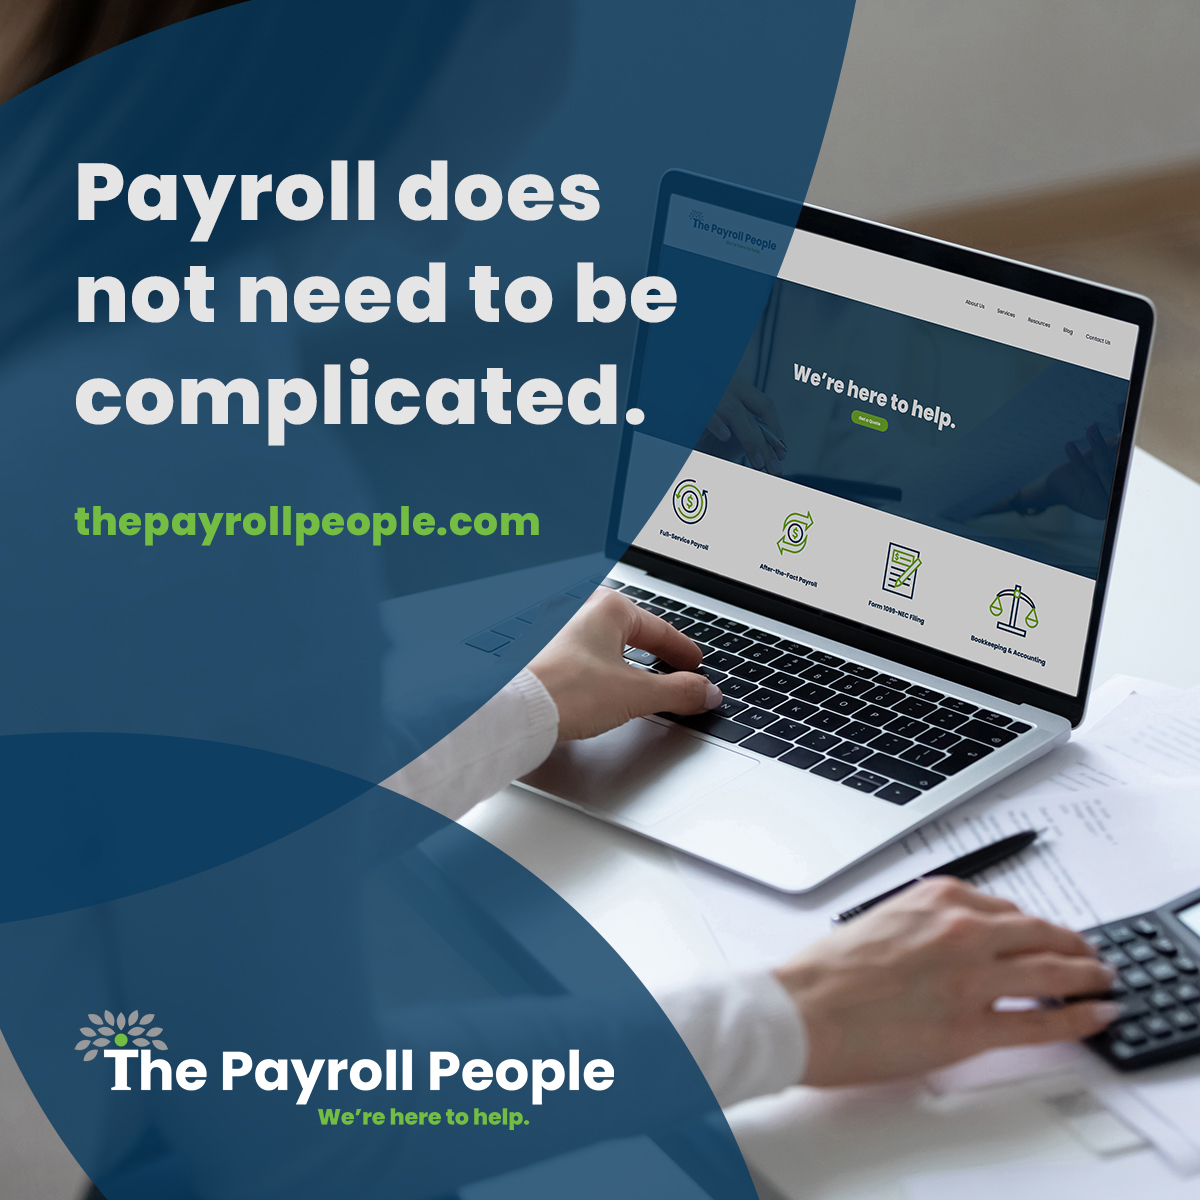 Social Media Post designed for The Payroll People